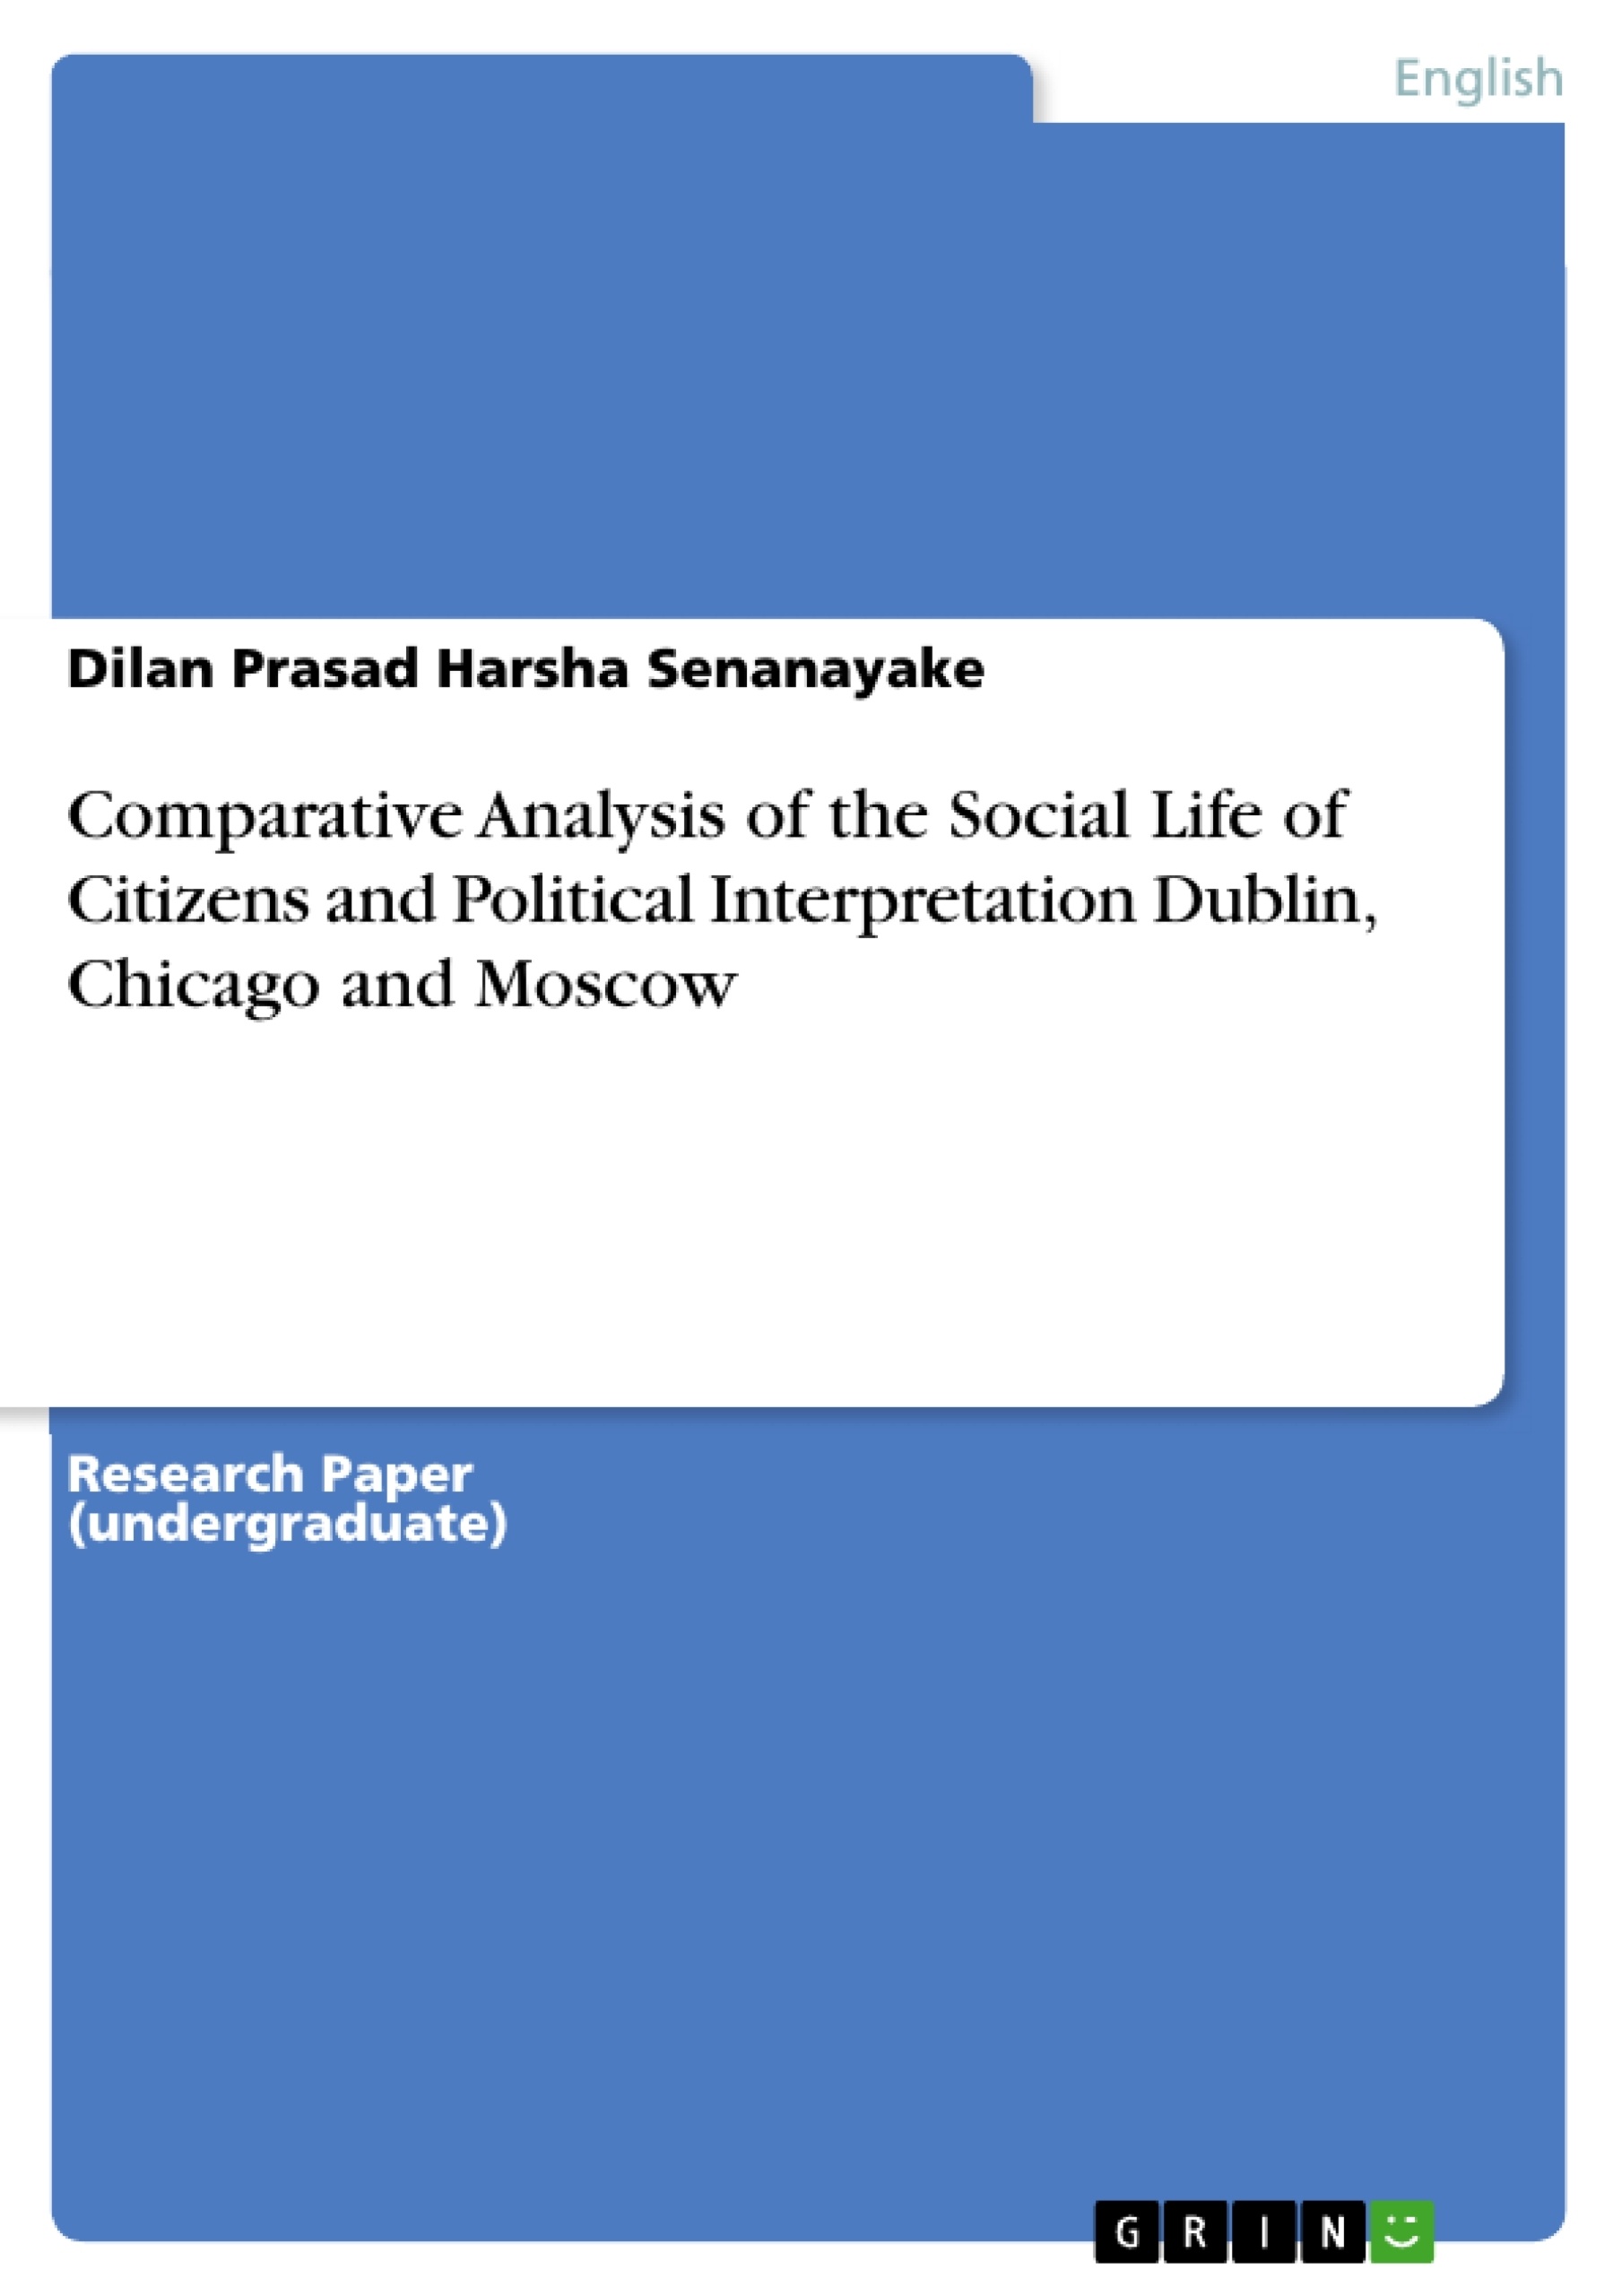 Title: Comparative Analysis of the Social Life of Citizens and Political Interpretation Dublin, Chicago and Moscow